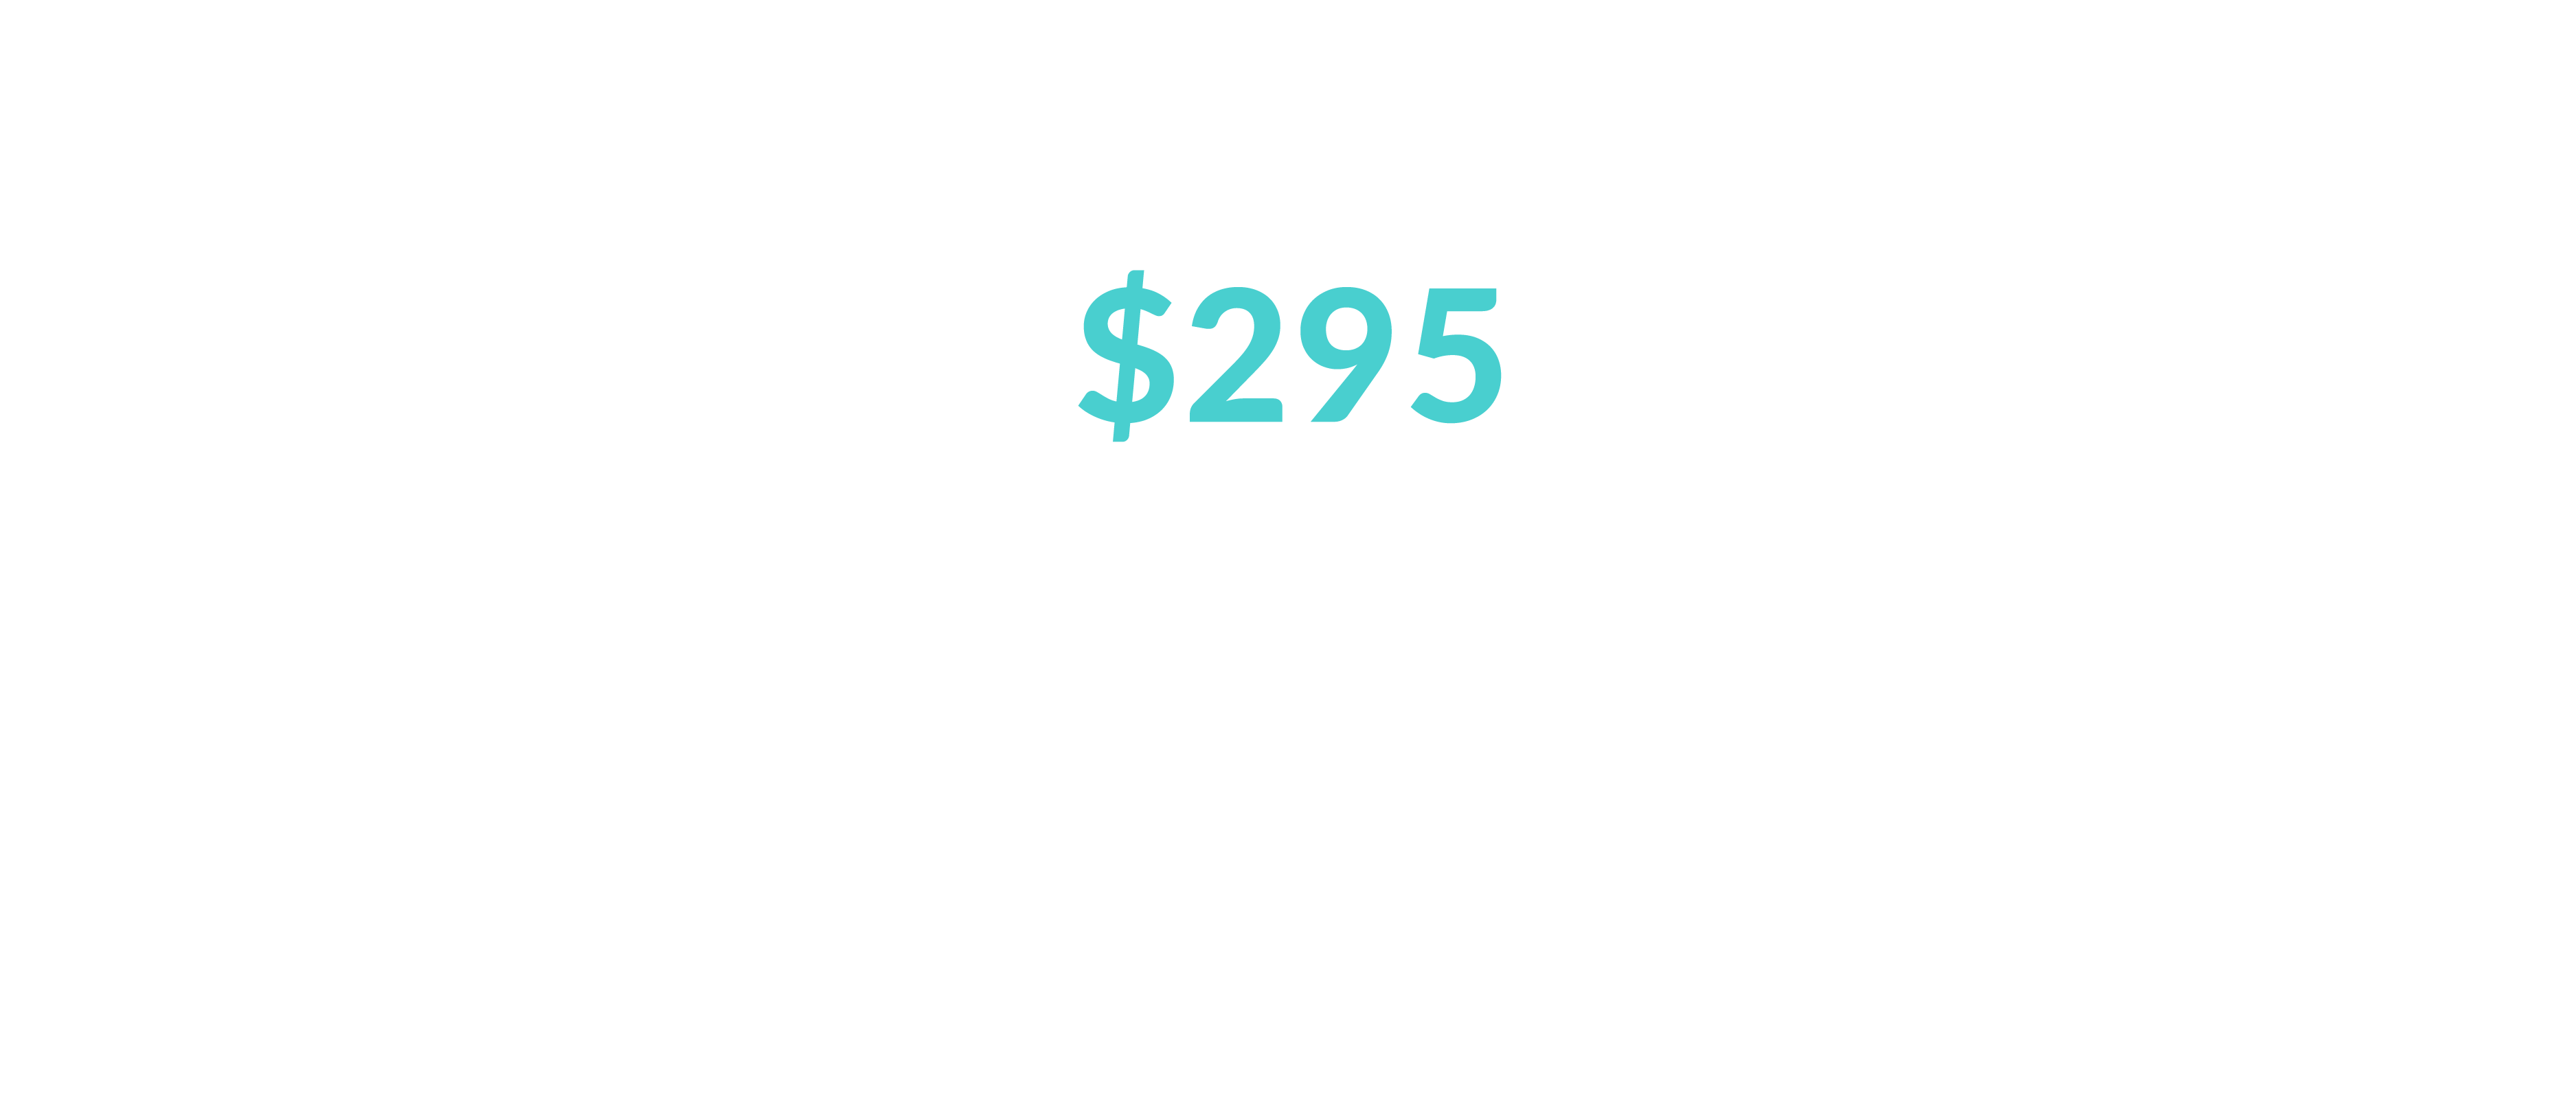 One-Time Payment of $295 (value $1,434)